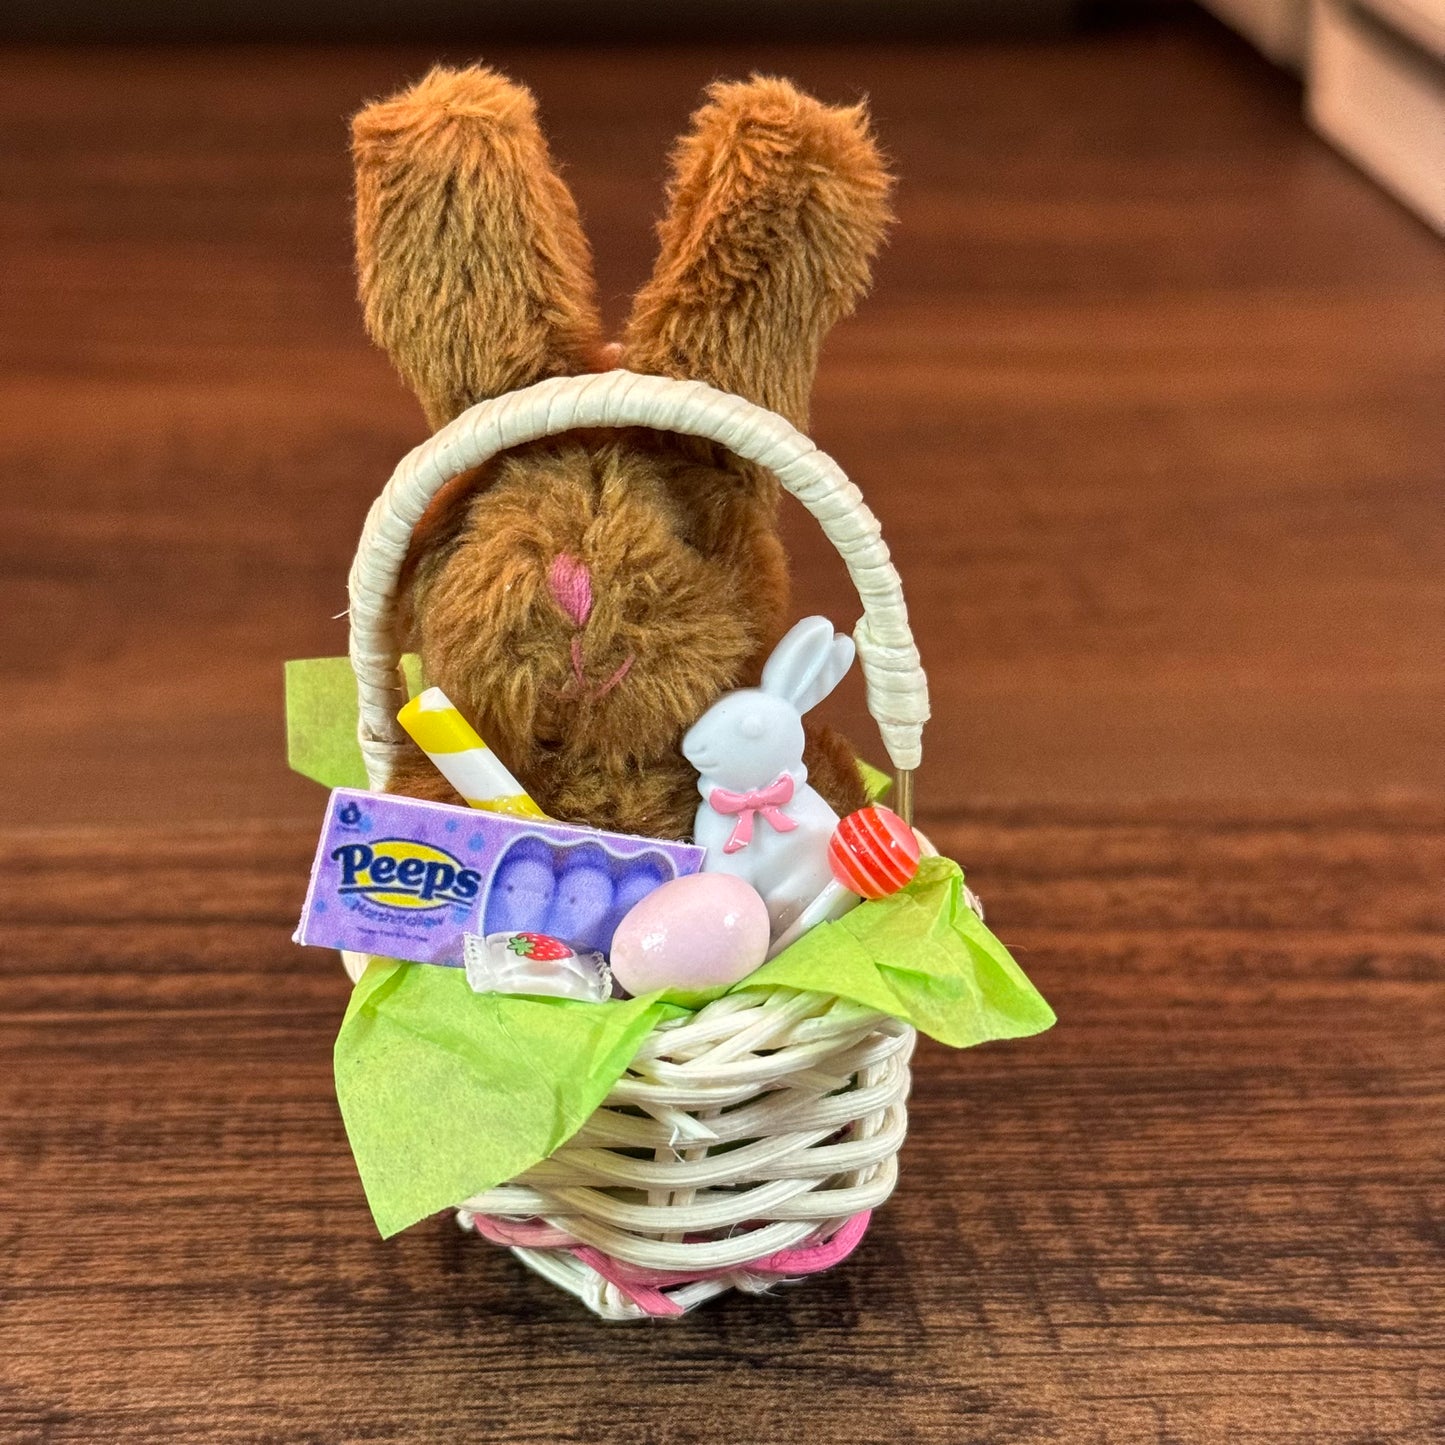 1:6 Scale Easter Basket